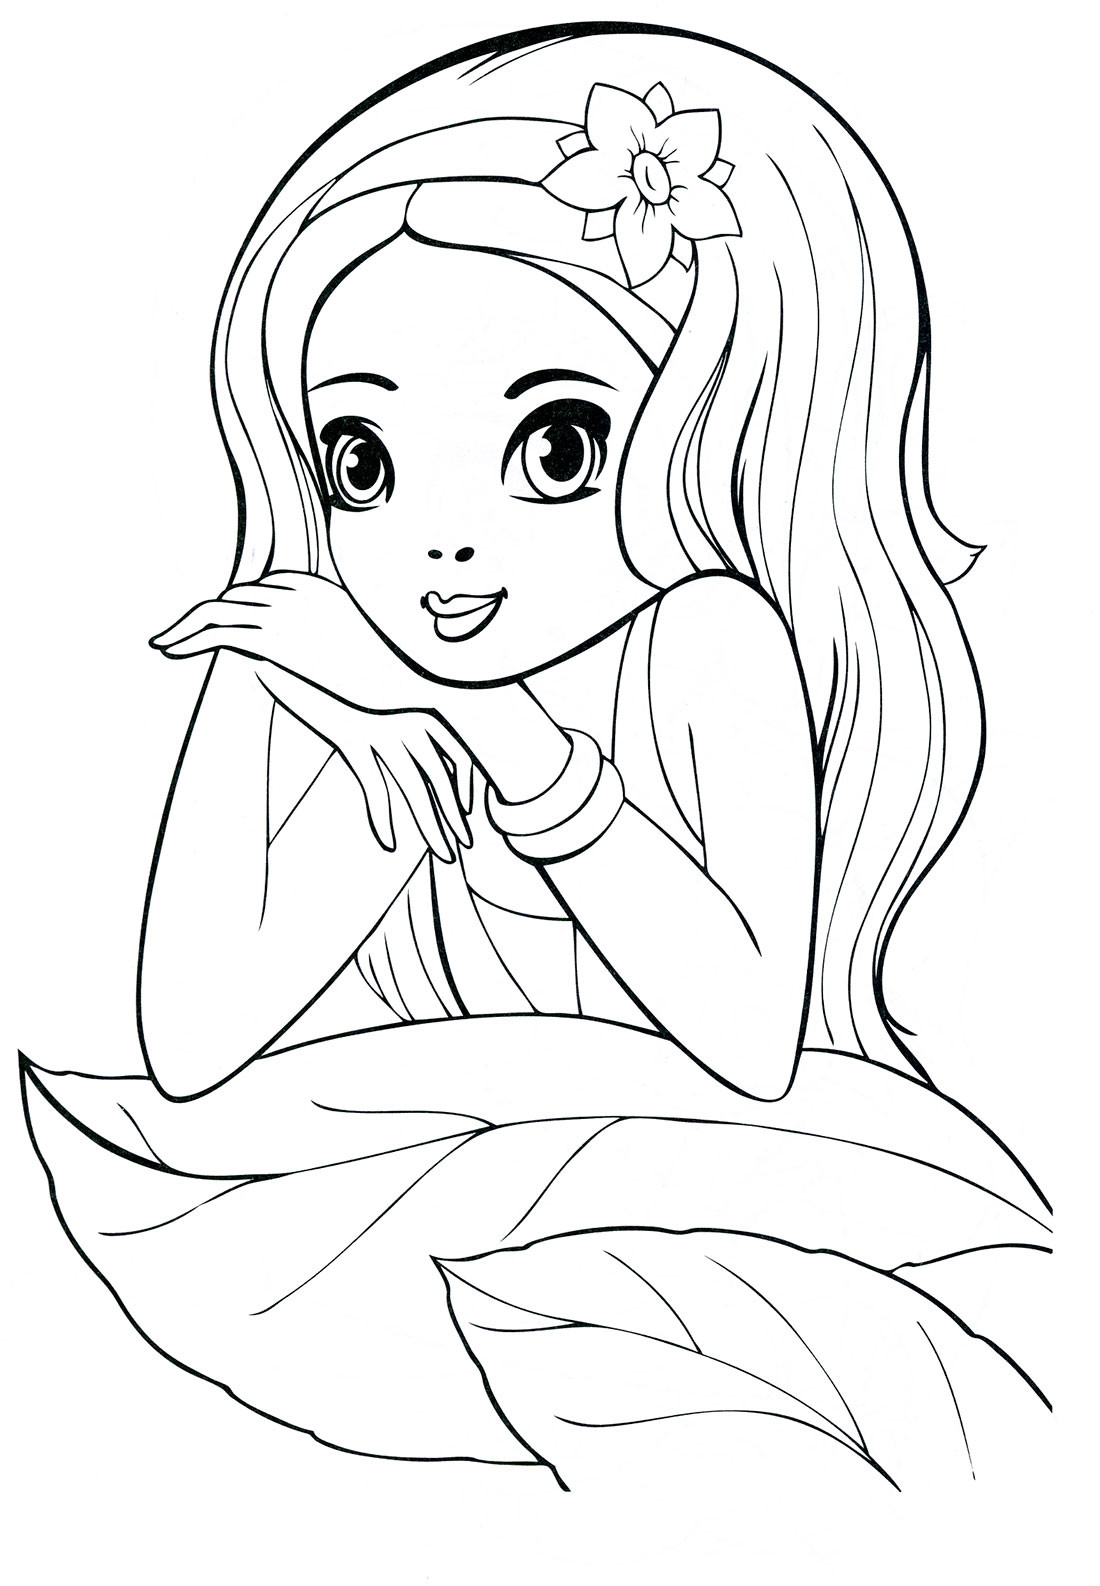 Girls Coloring Sheets
 Coloring pages for 8 9 10 year old girls to and